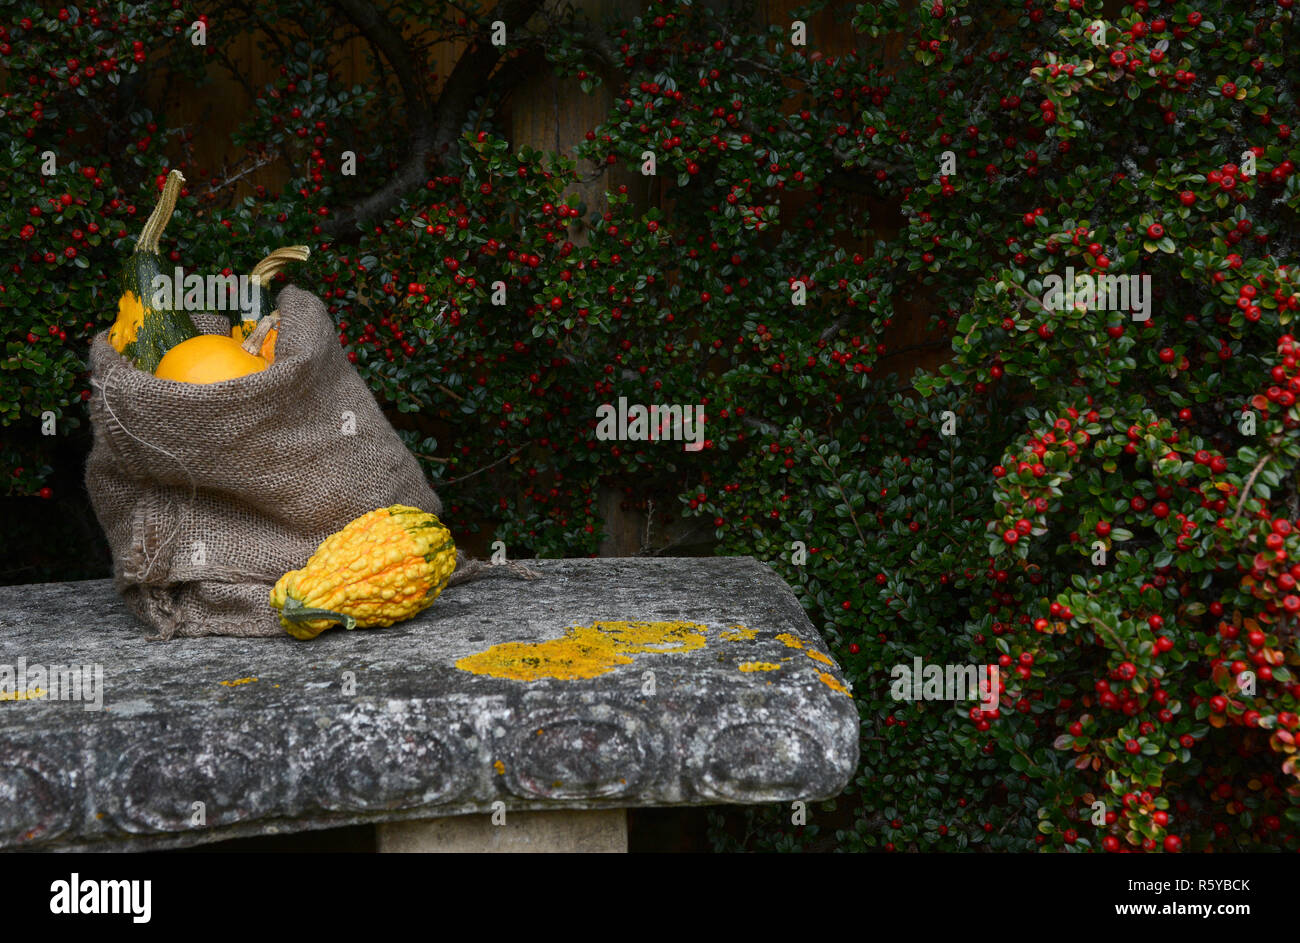 Stone bench with jute sack full of ornamental gourds Stock Photo